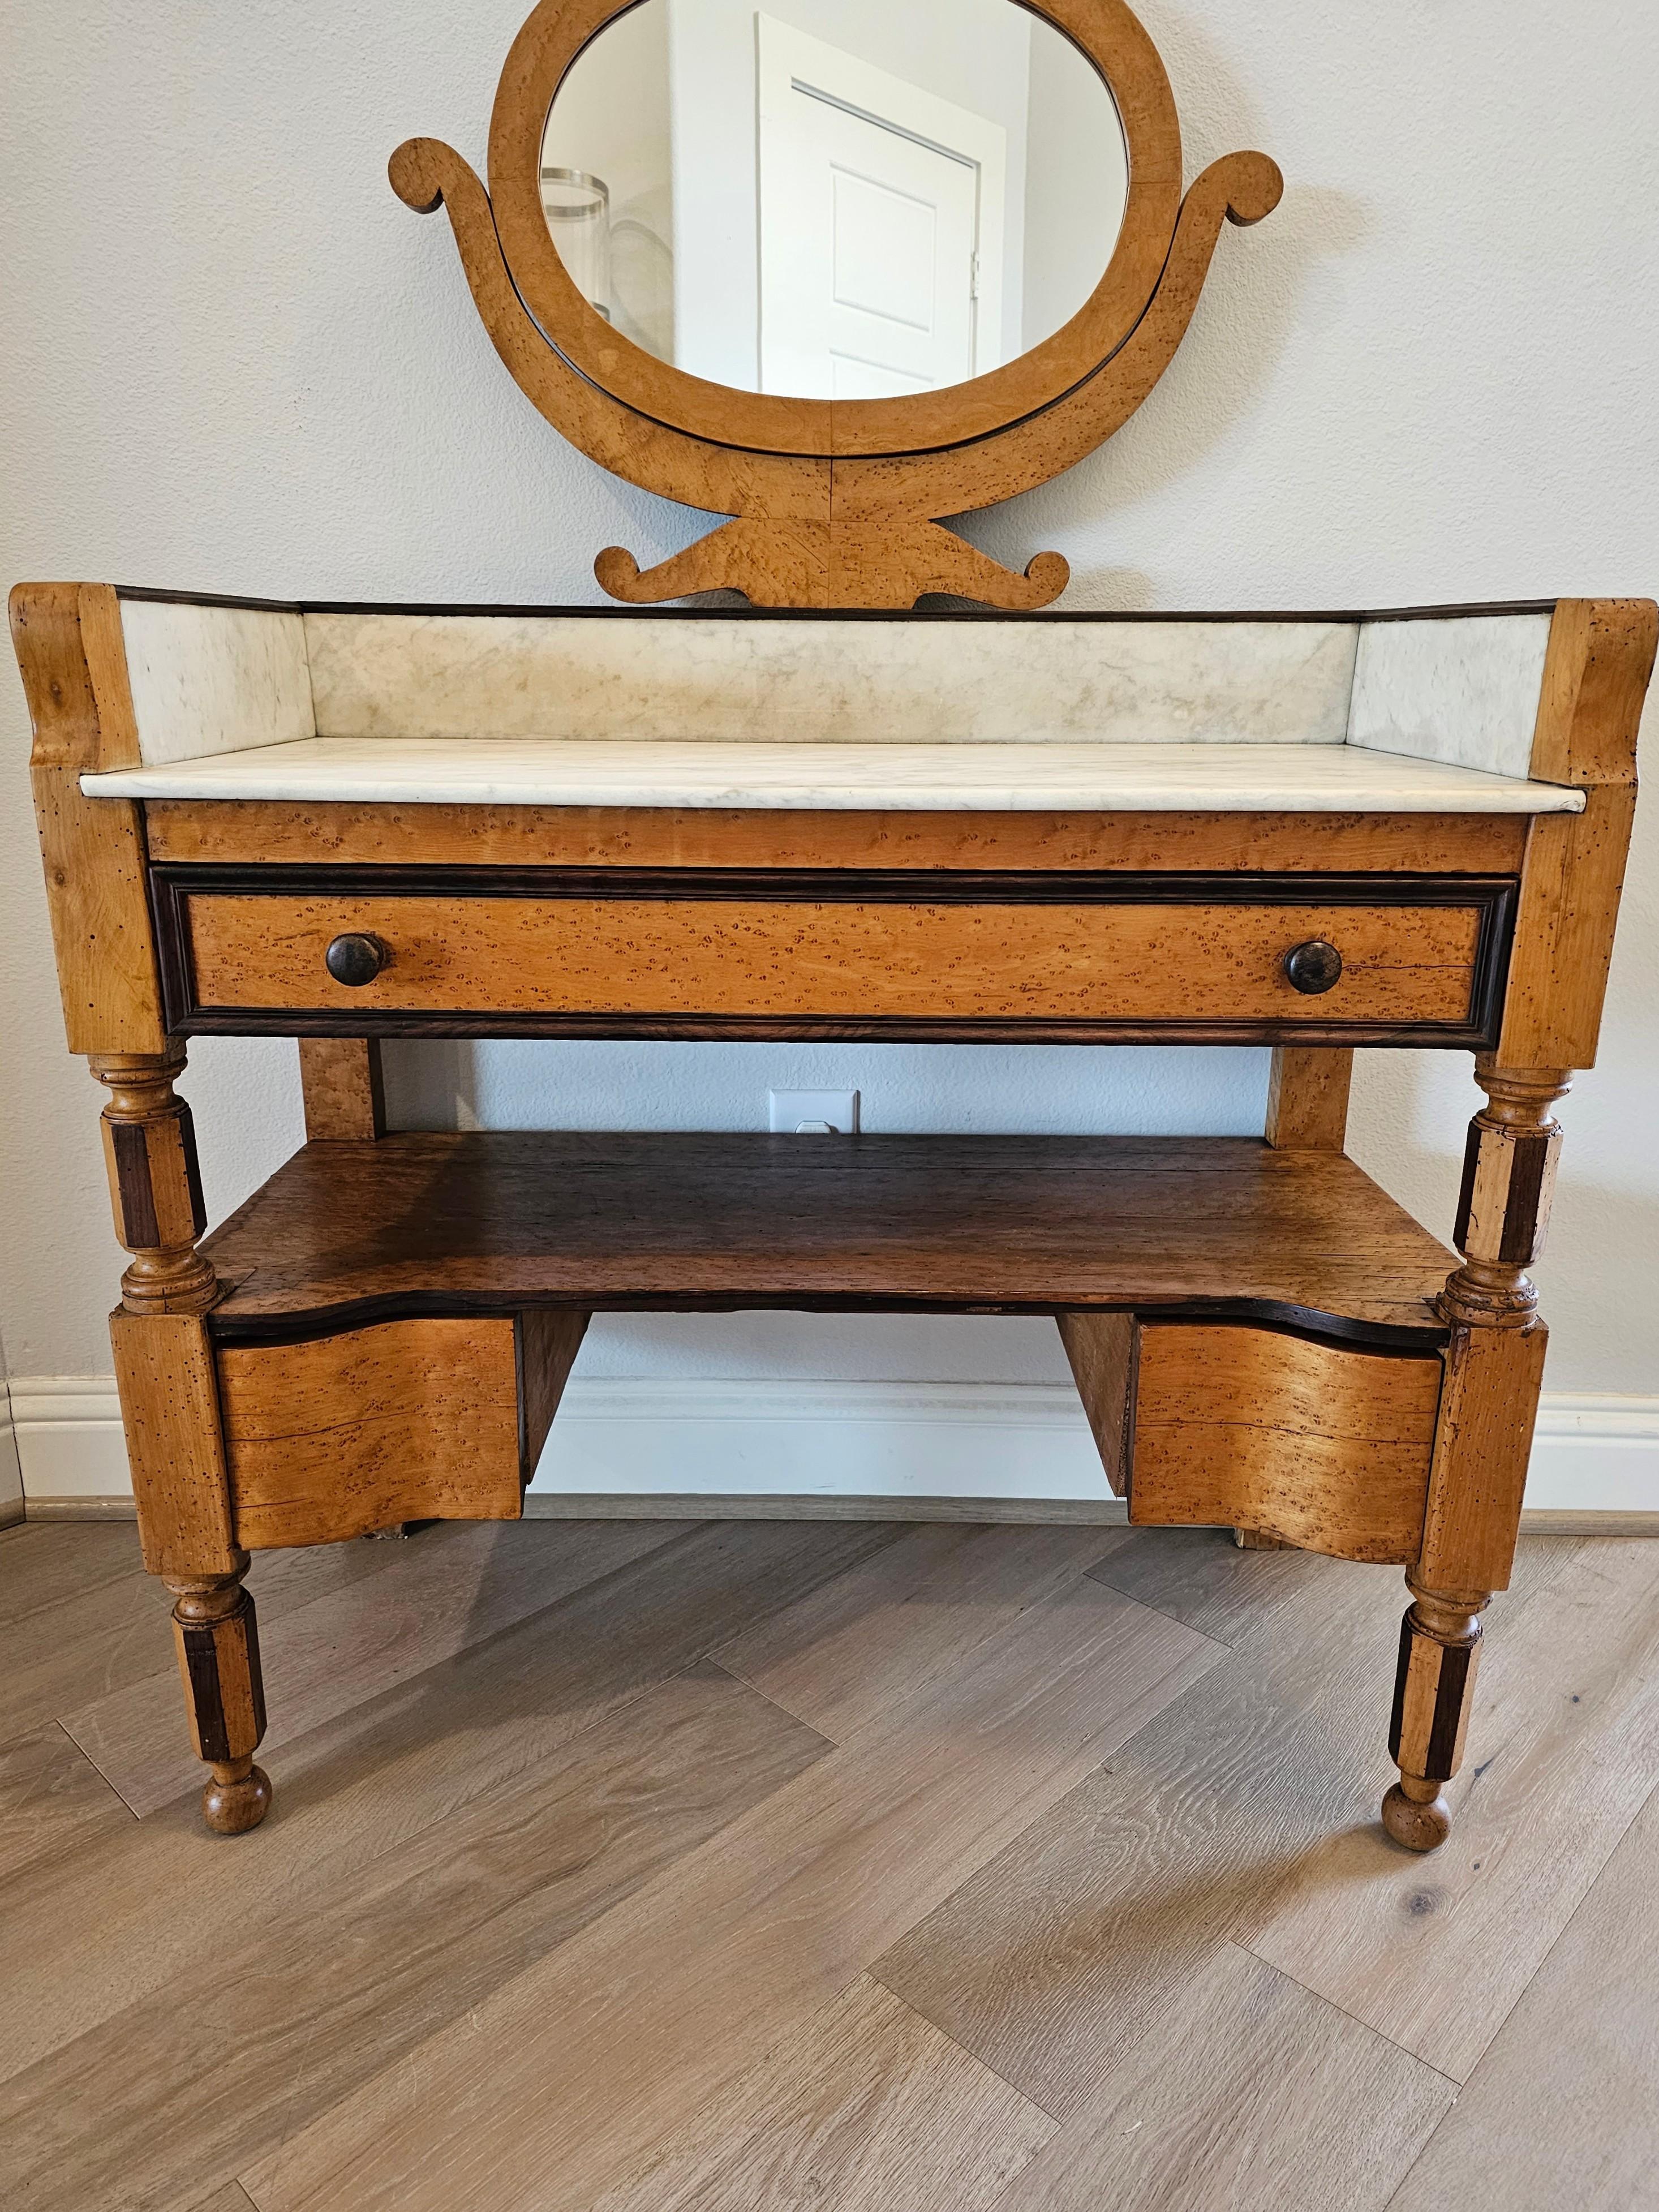 A lovely antique French birdseye maple wash stand. circa 1880

Finely hand-crafted in the second half of the 19th century, finished on all sides so it can be placed anywhere in the room, having a white and gray veined marble-lined top and partial